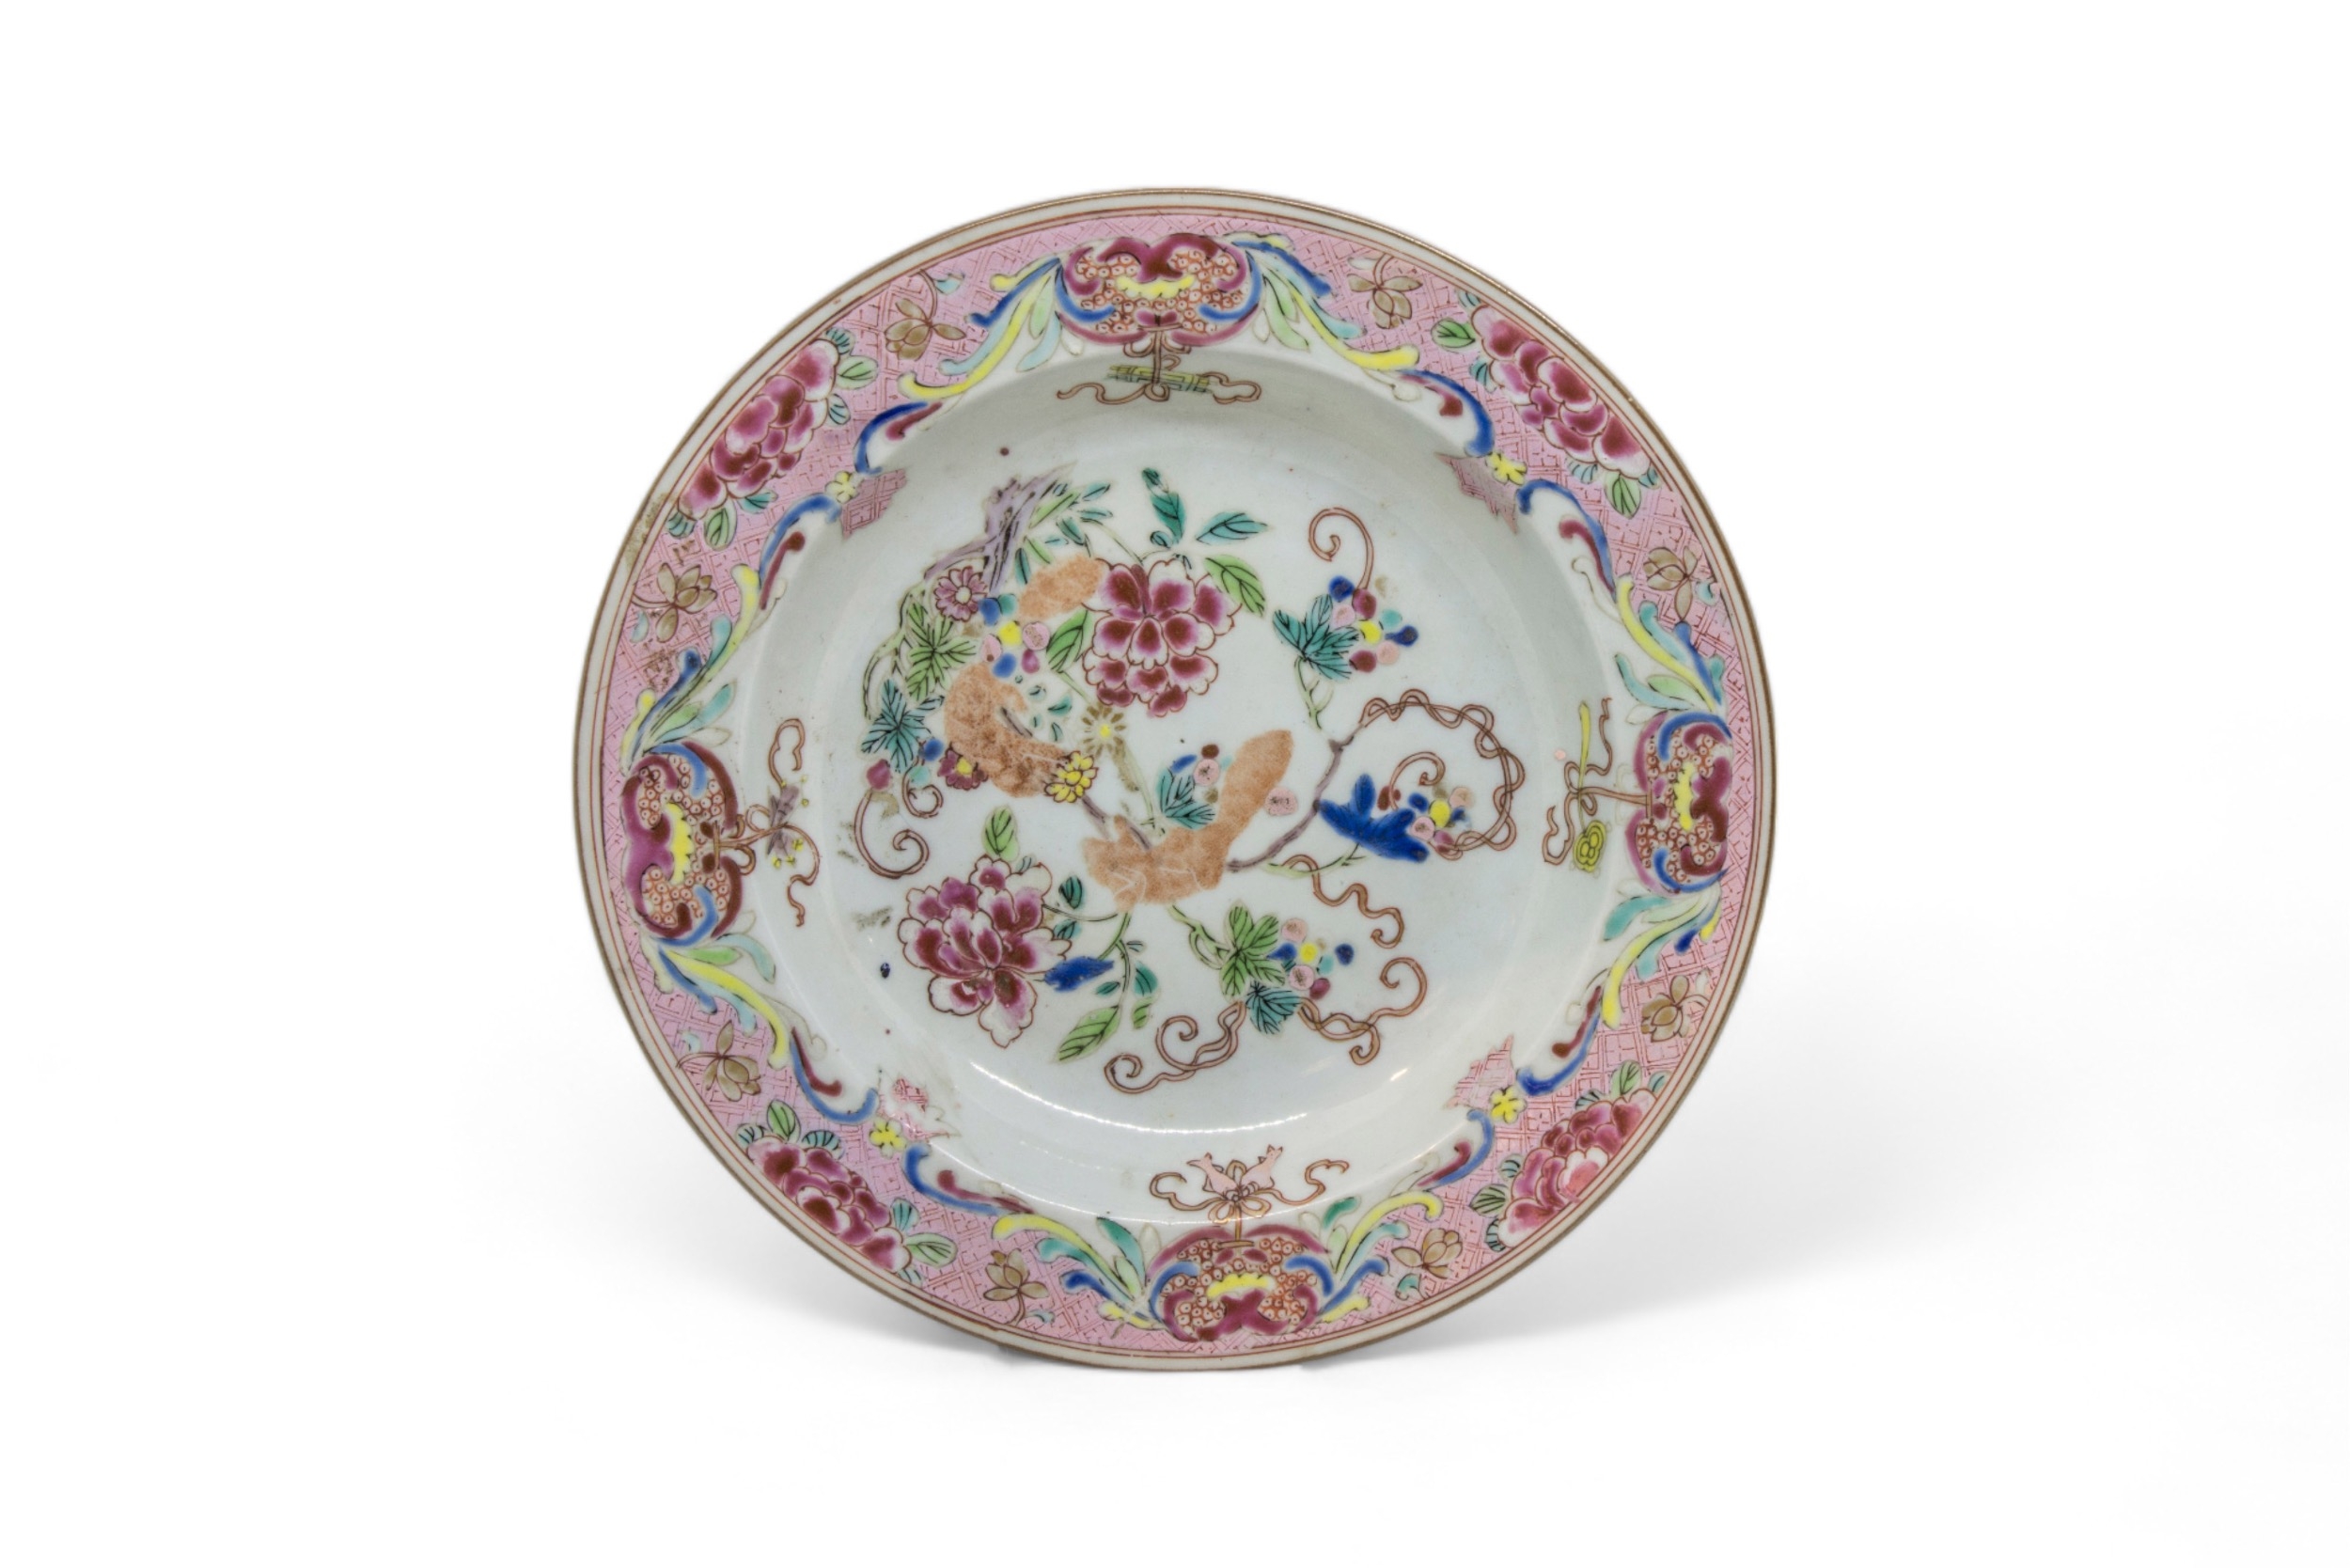 A GROUP OF TEN CHINESE EXPORT DISHES QING DYNASTY, 18TH CENTURY 23cm diam approx. - Image 11 of 11